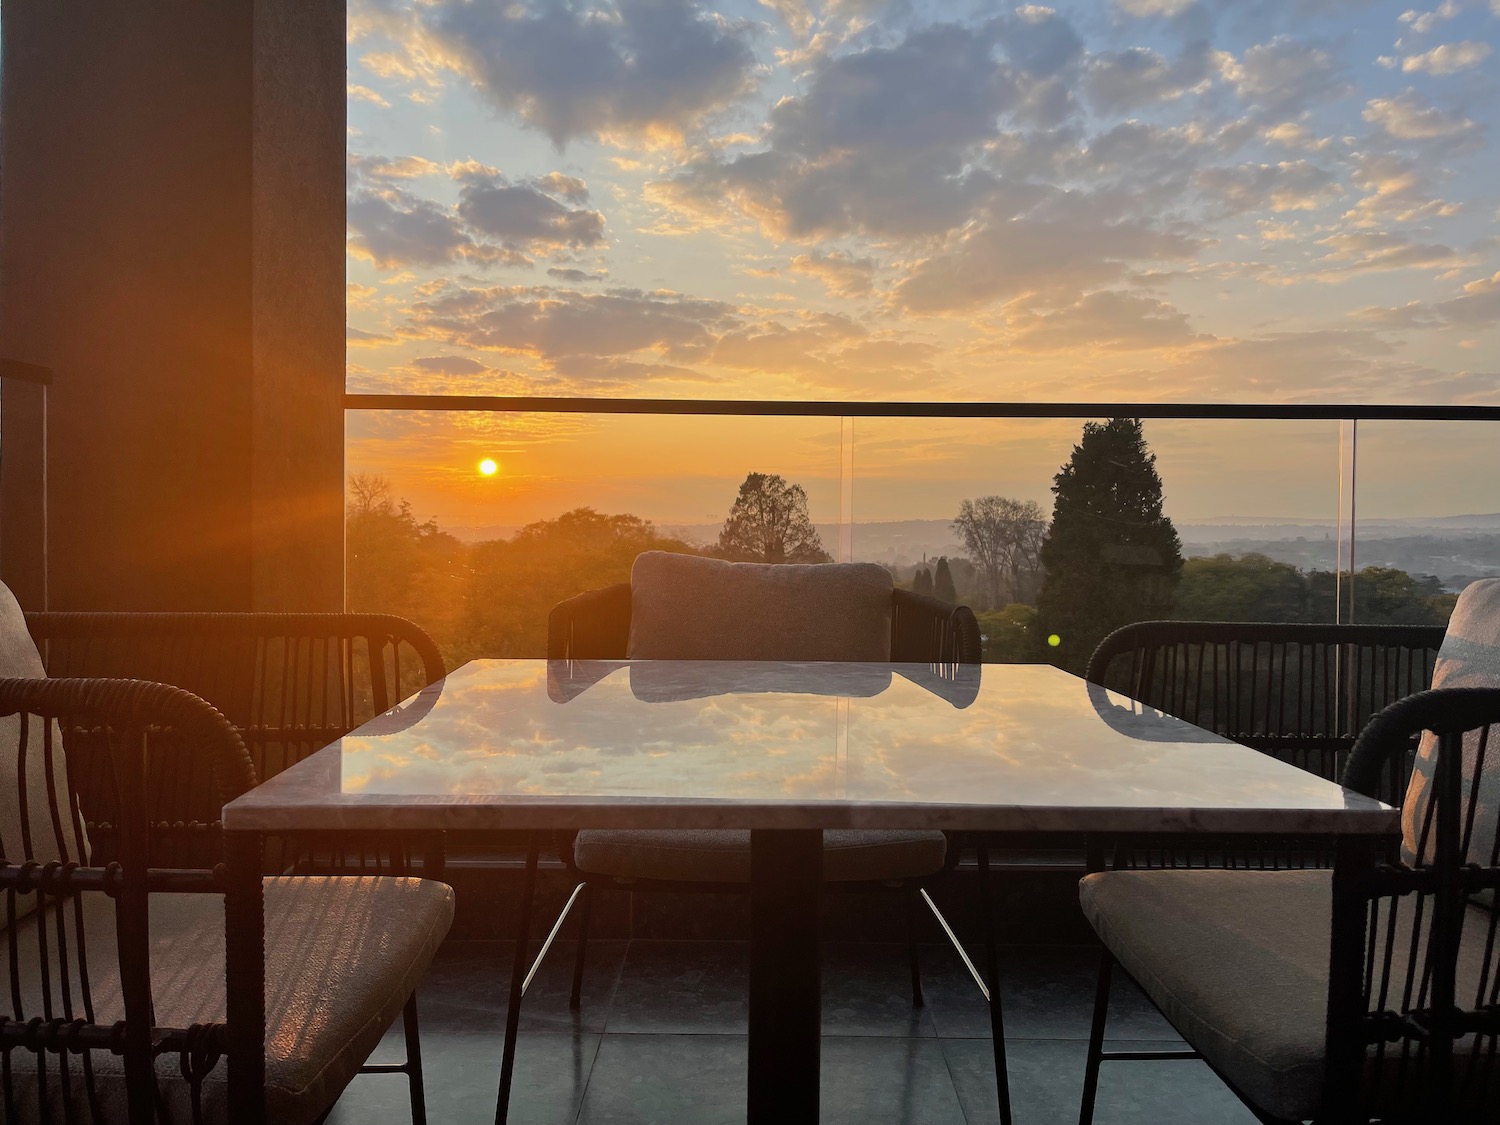 a table and chairs on a patio with a sunset in the background